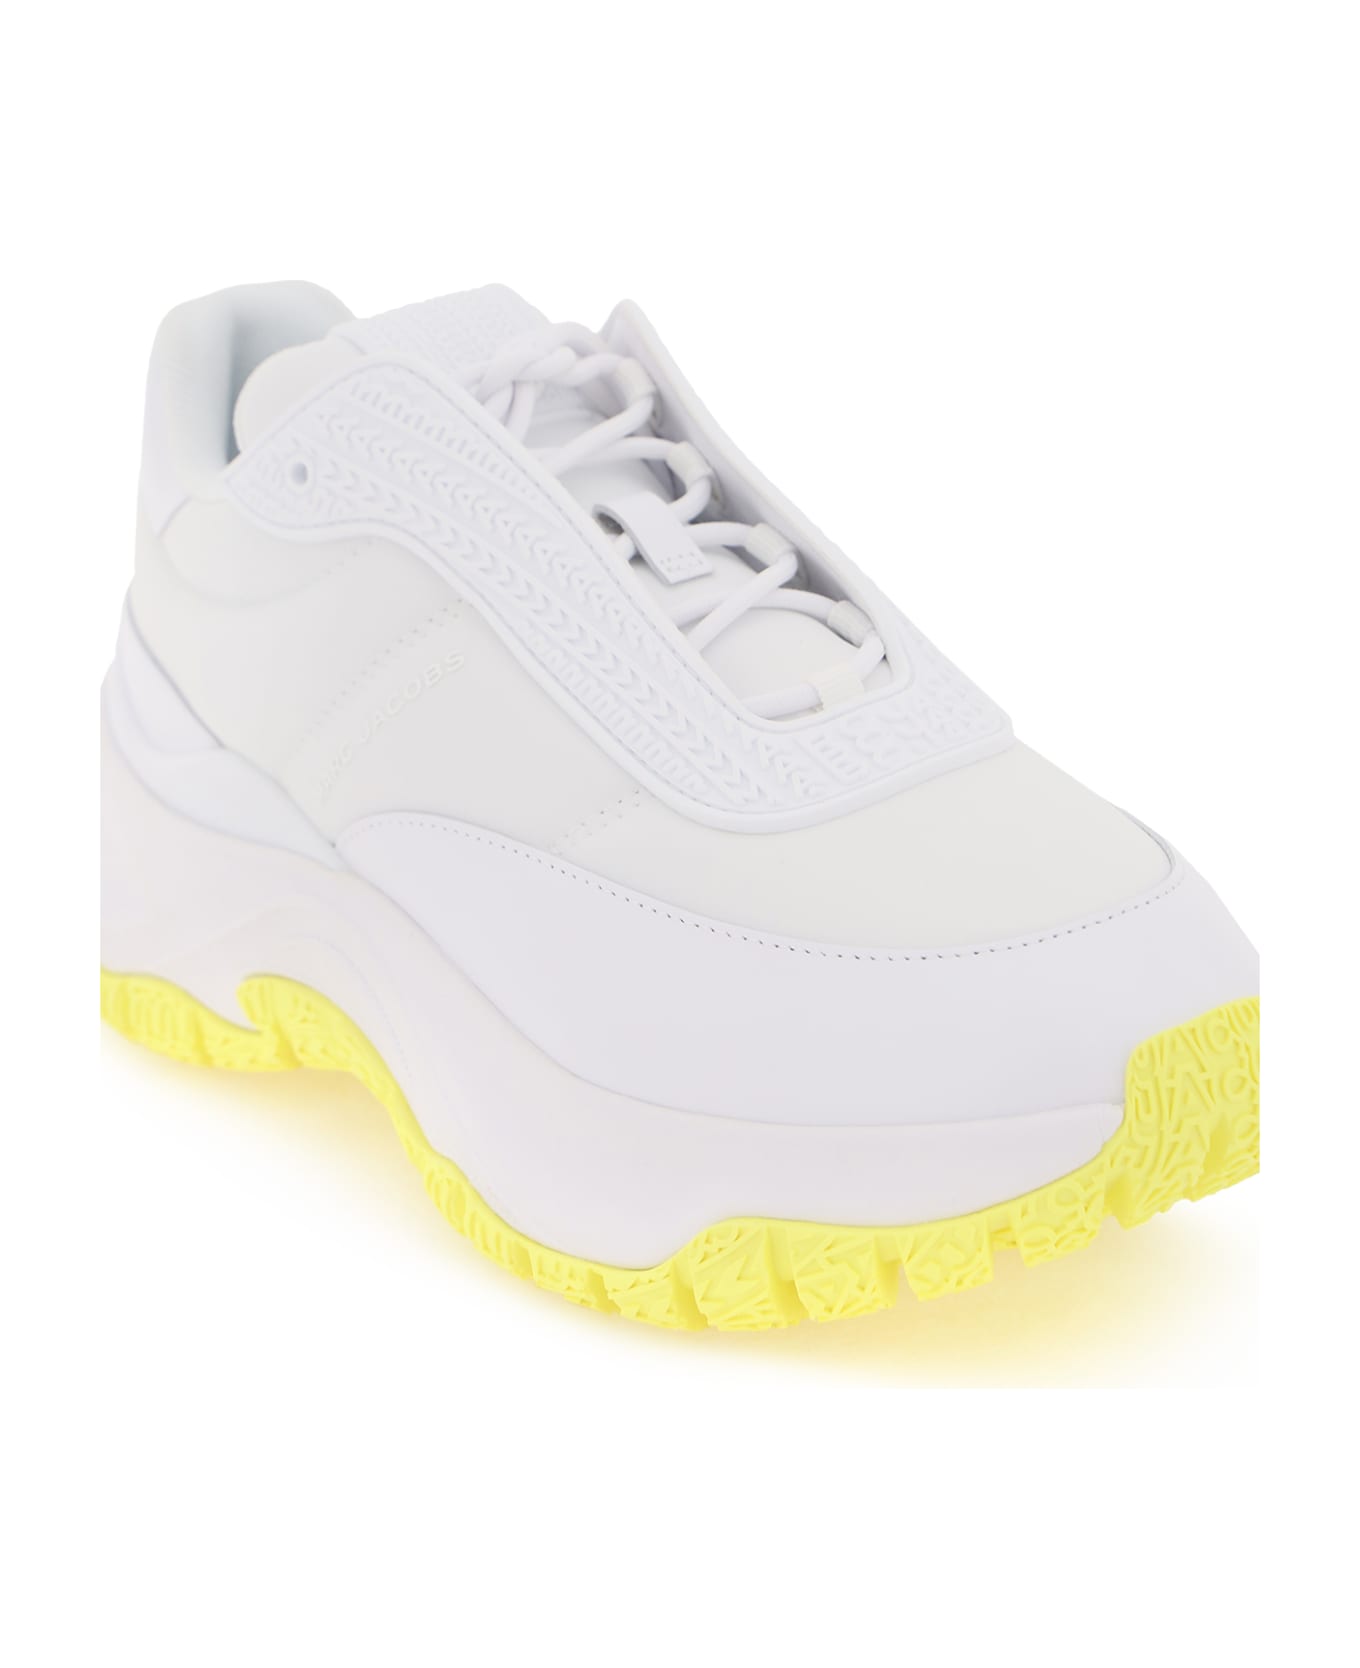 Marc Jacobs The Lazy Runner Sneakers - WHITE YELLOW (White)